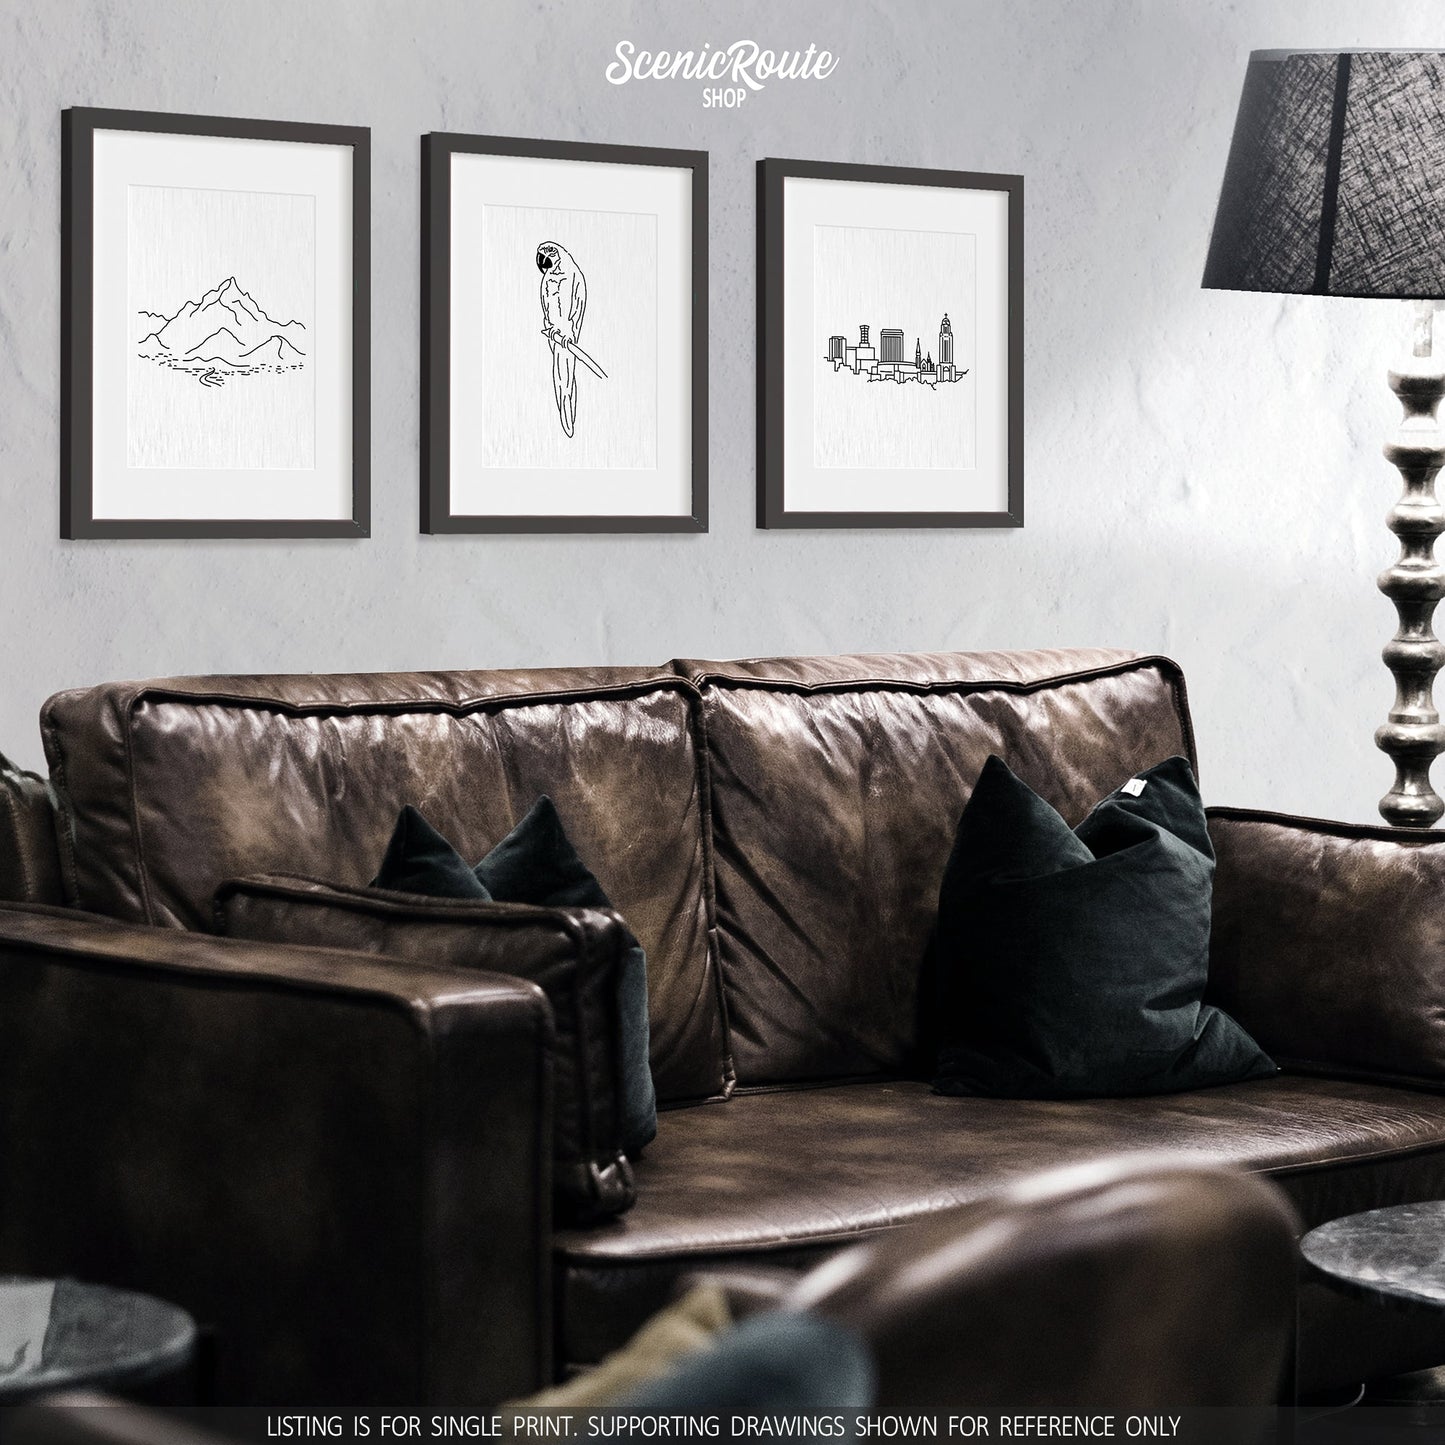 A group of three framed drawings on a wall above a couch. The line art drawings include Piestewa Peak, a Parrot, and Lincoln Skyline